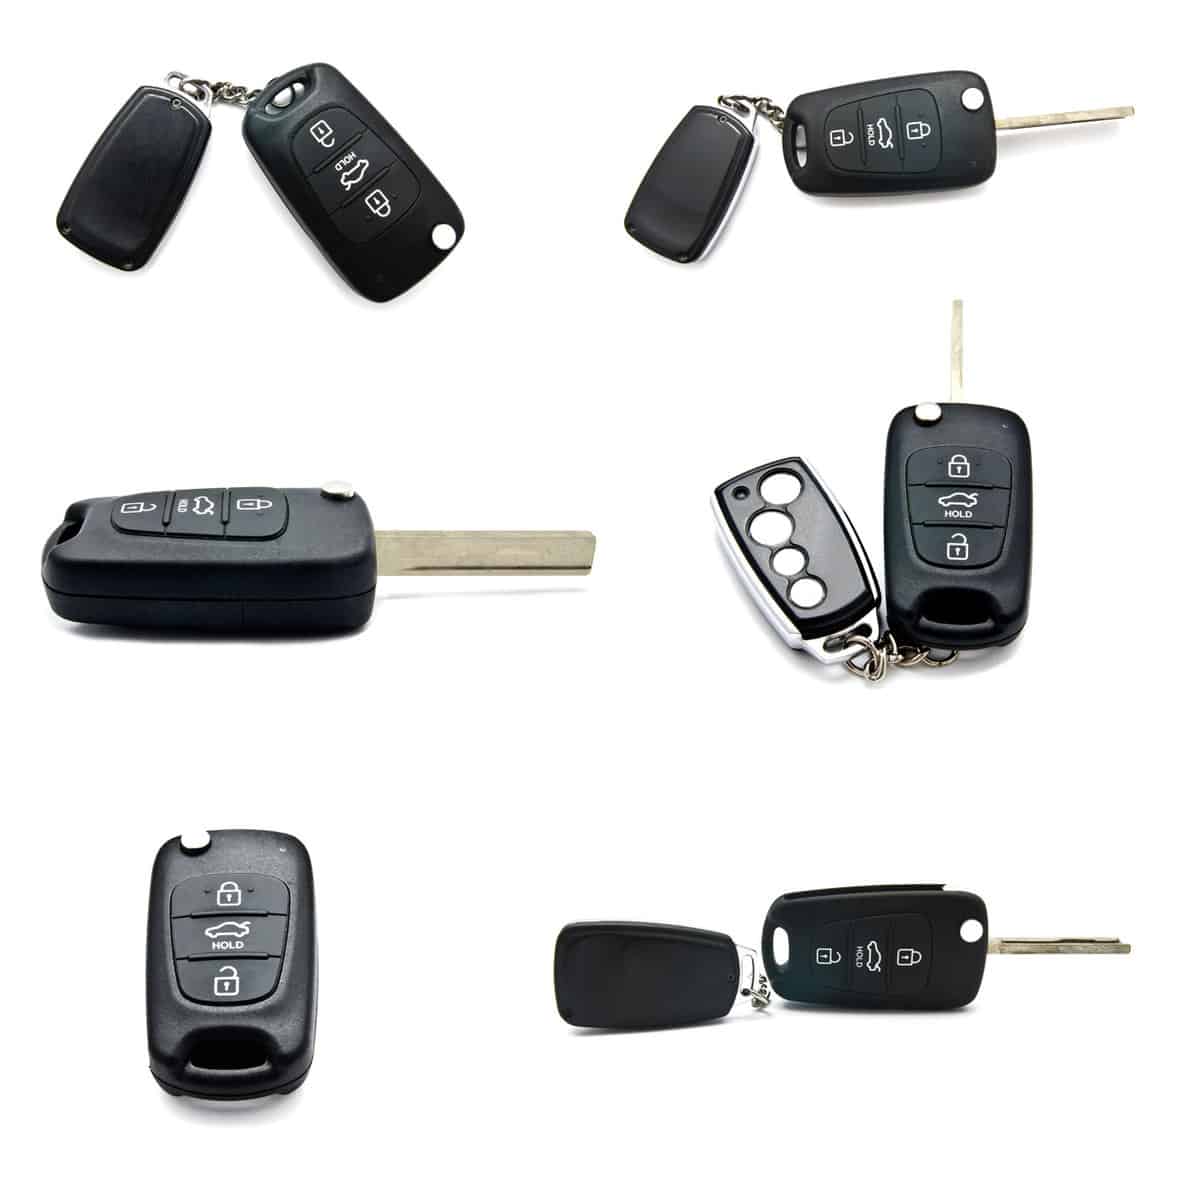 Car key fobs on a white background